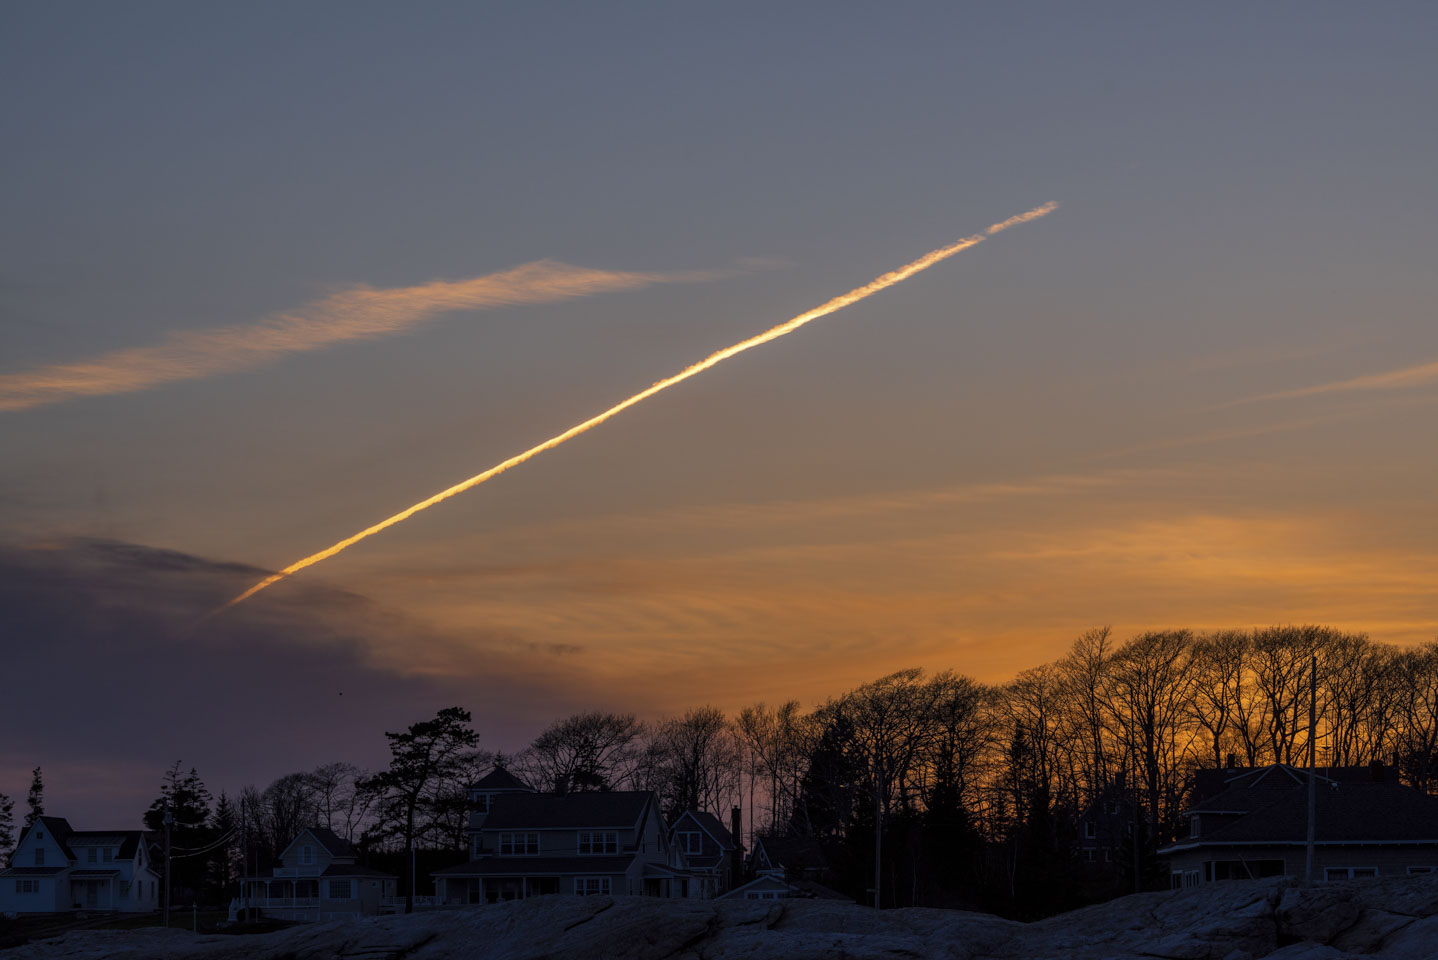 Sunset lighting the contrail from a jet